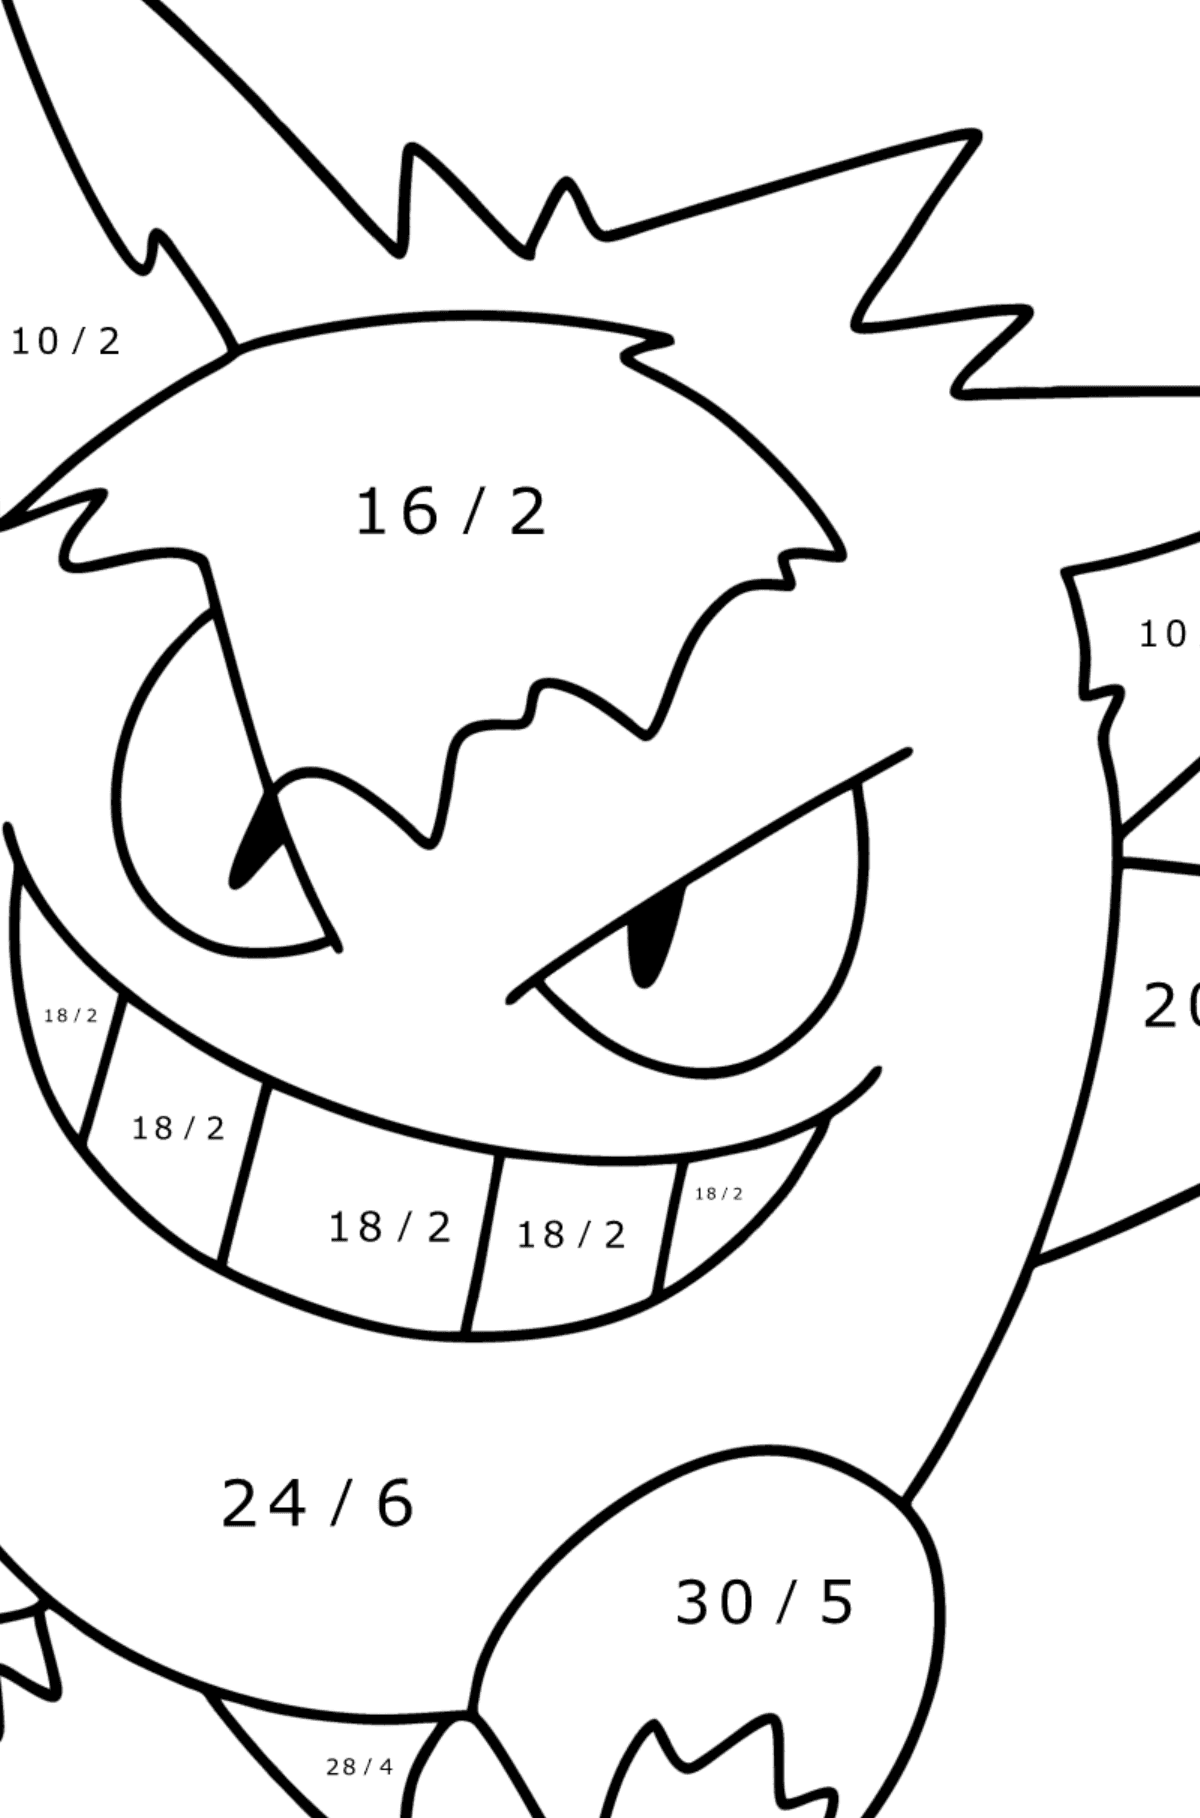 Pokémon Go Gengar coloring page - Math Coloring - Division for Kids